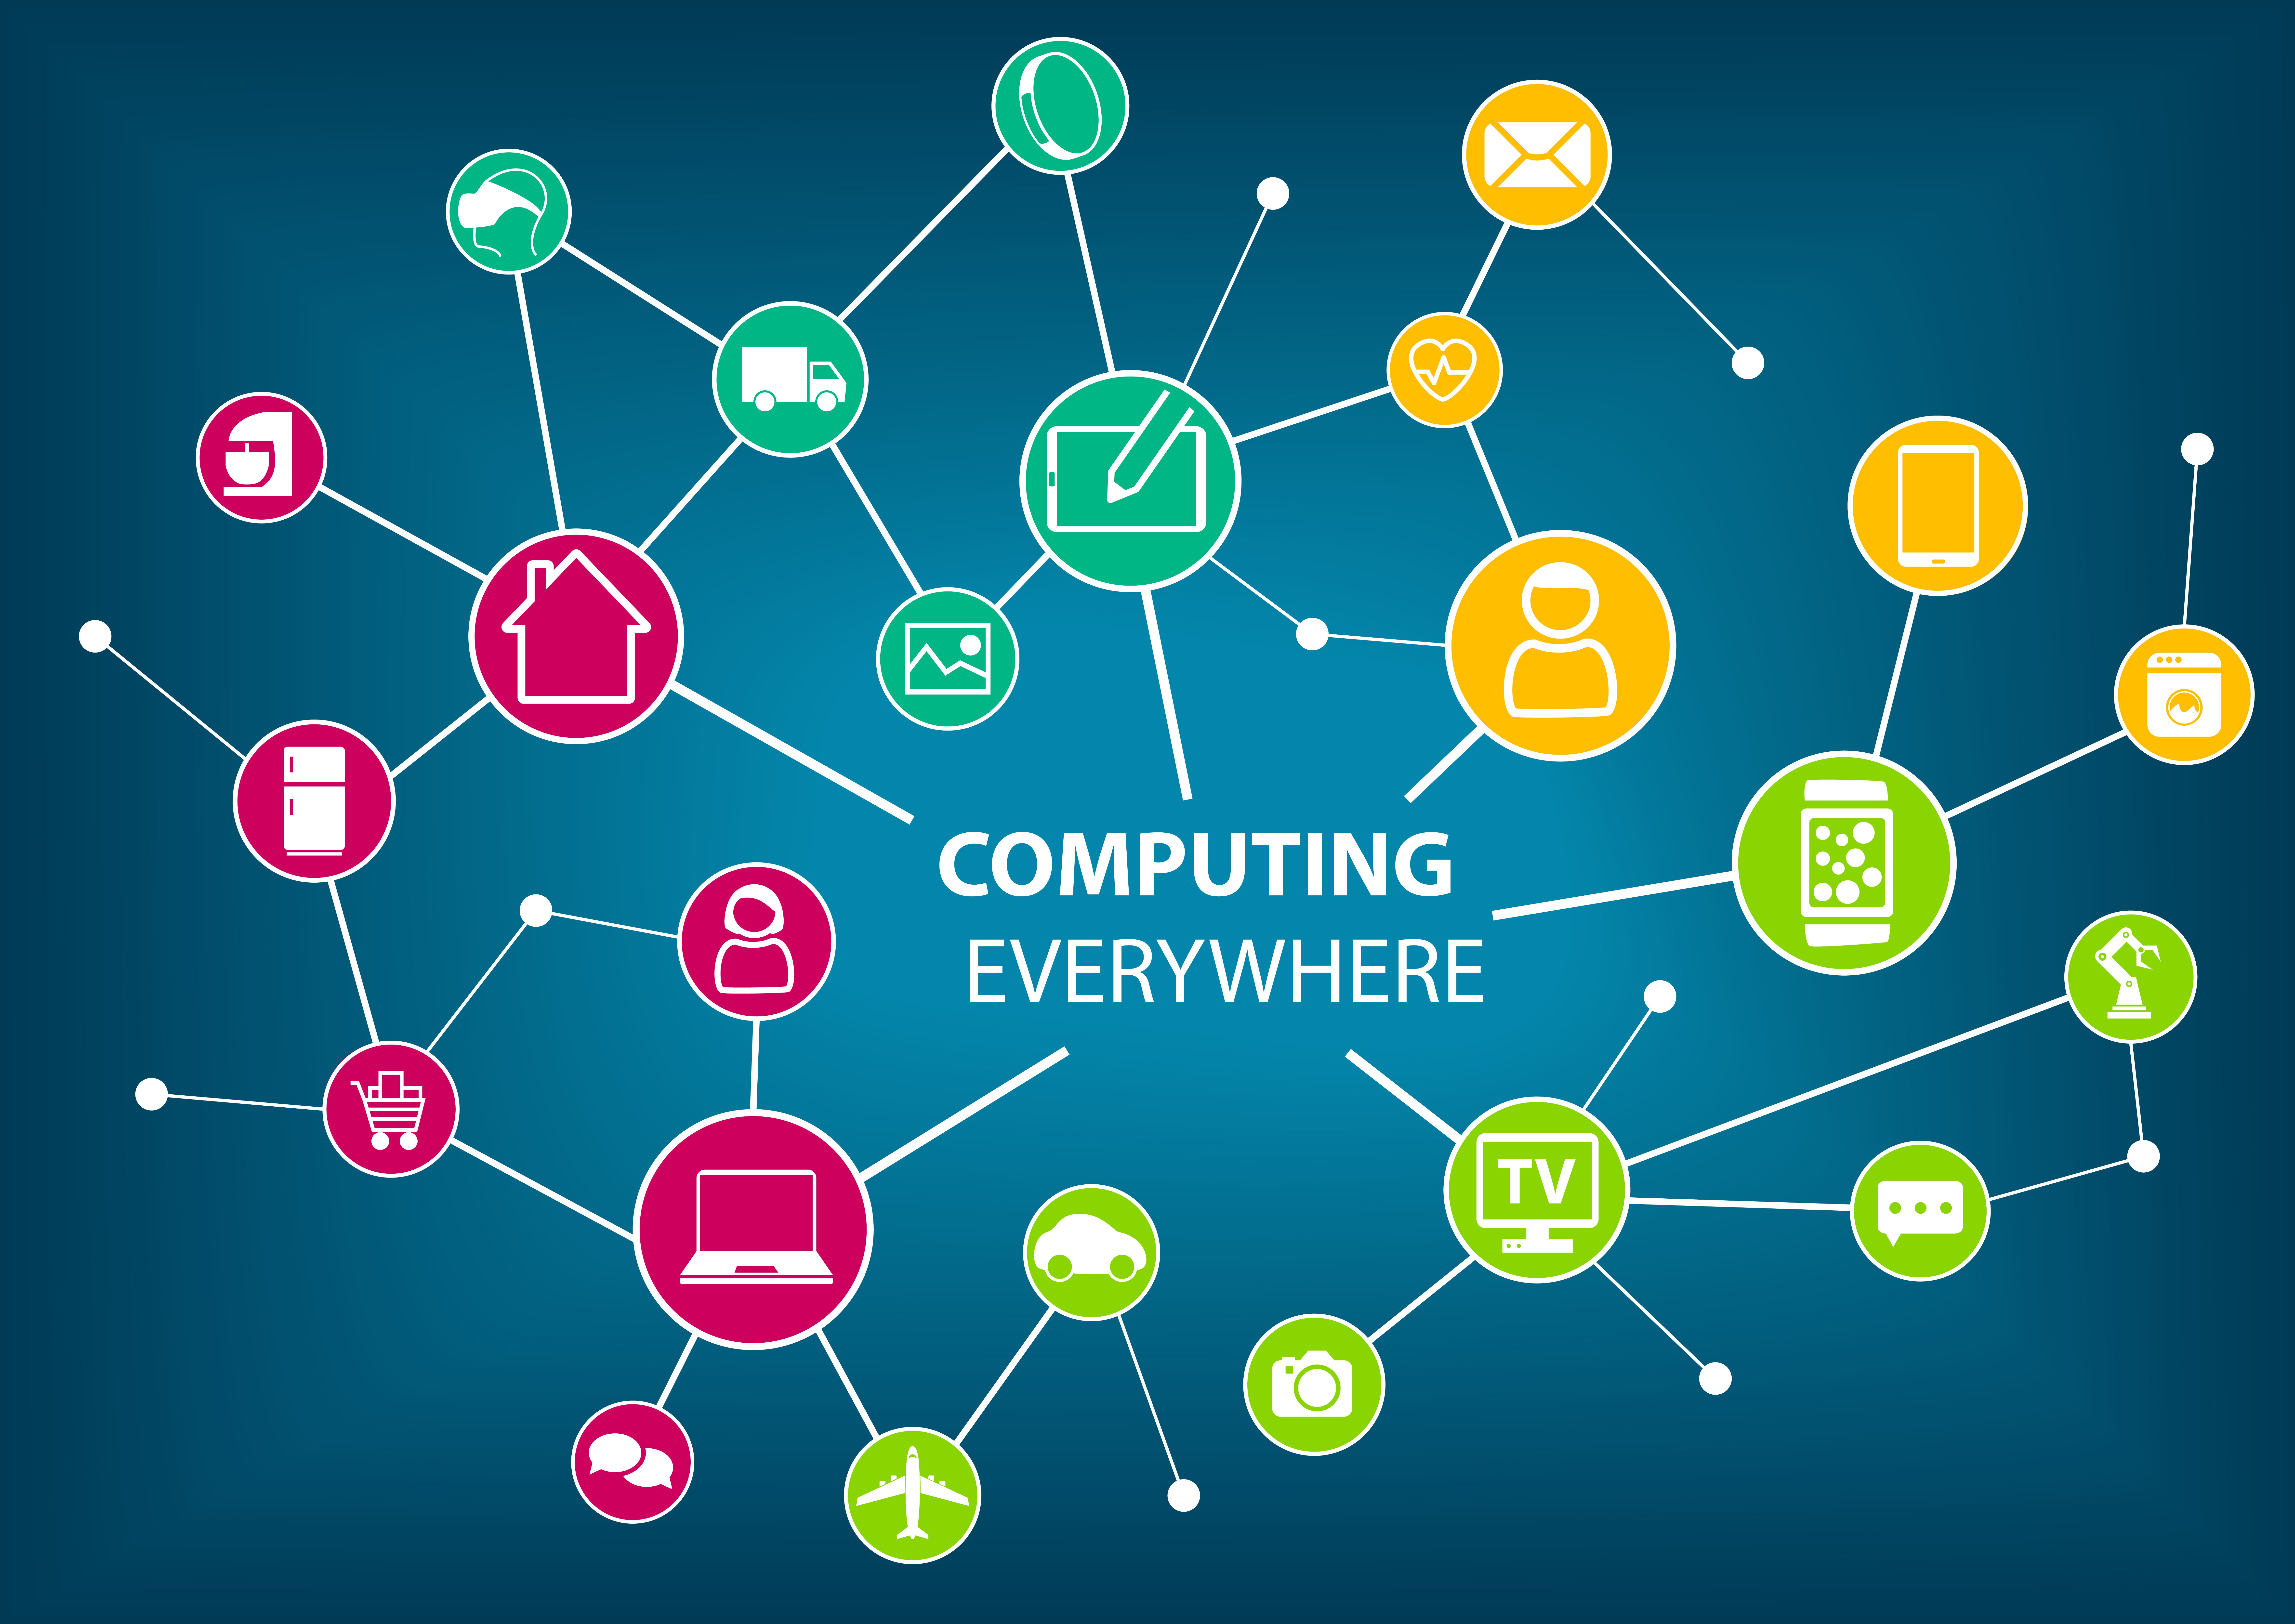 icons with text in center saying, "computing everywhere" to represent endpoints